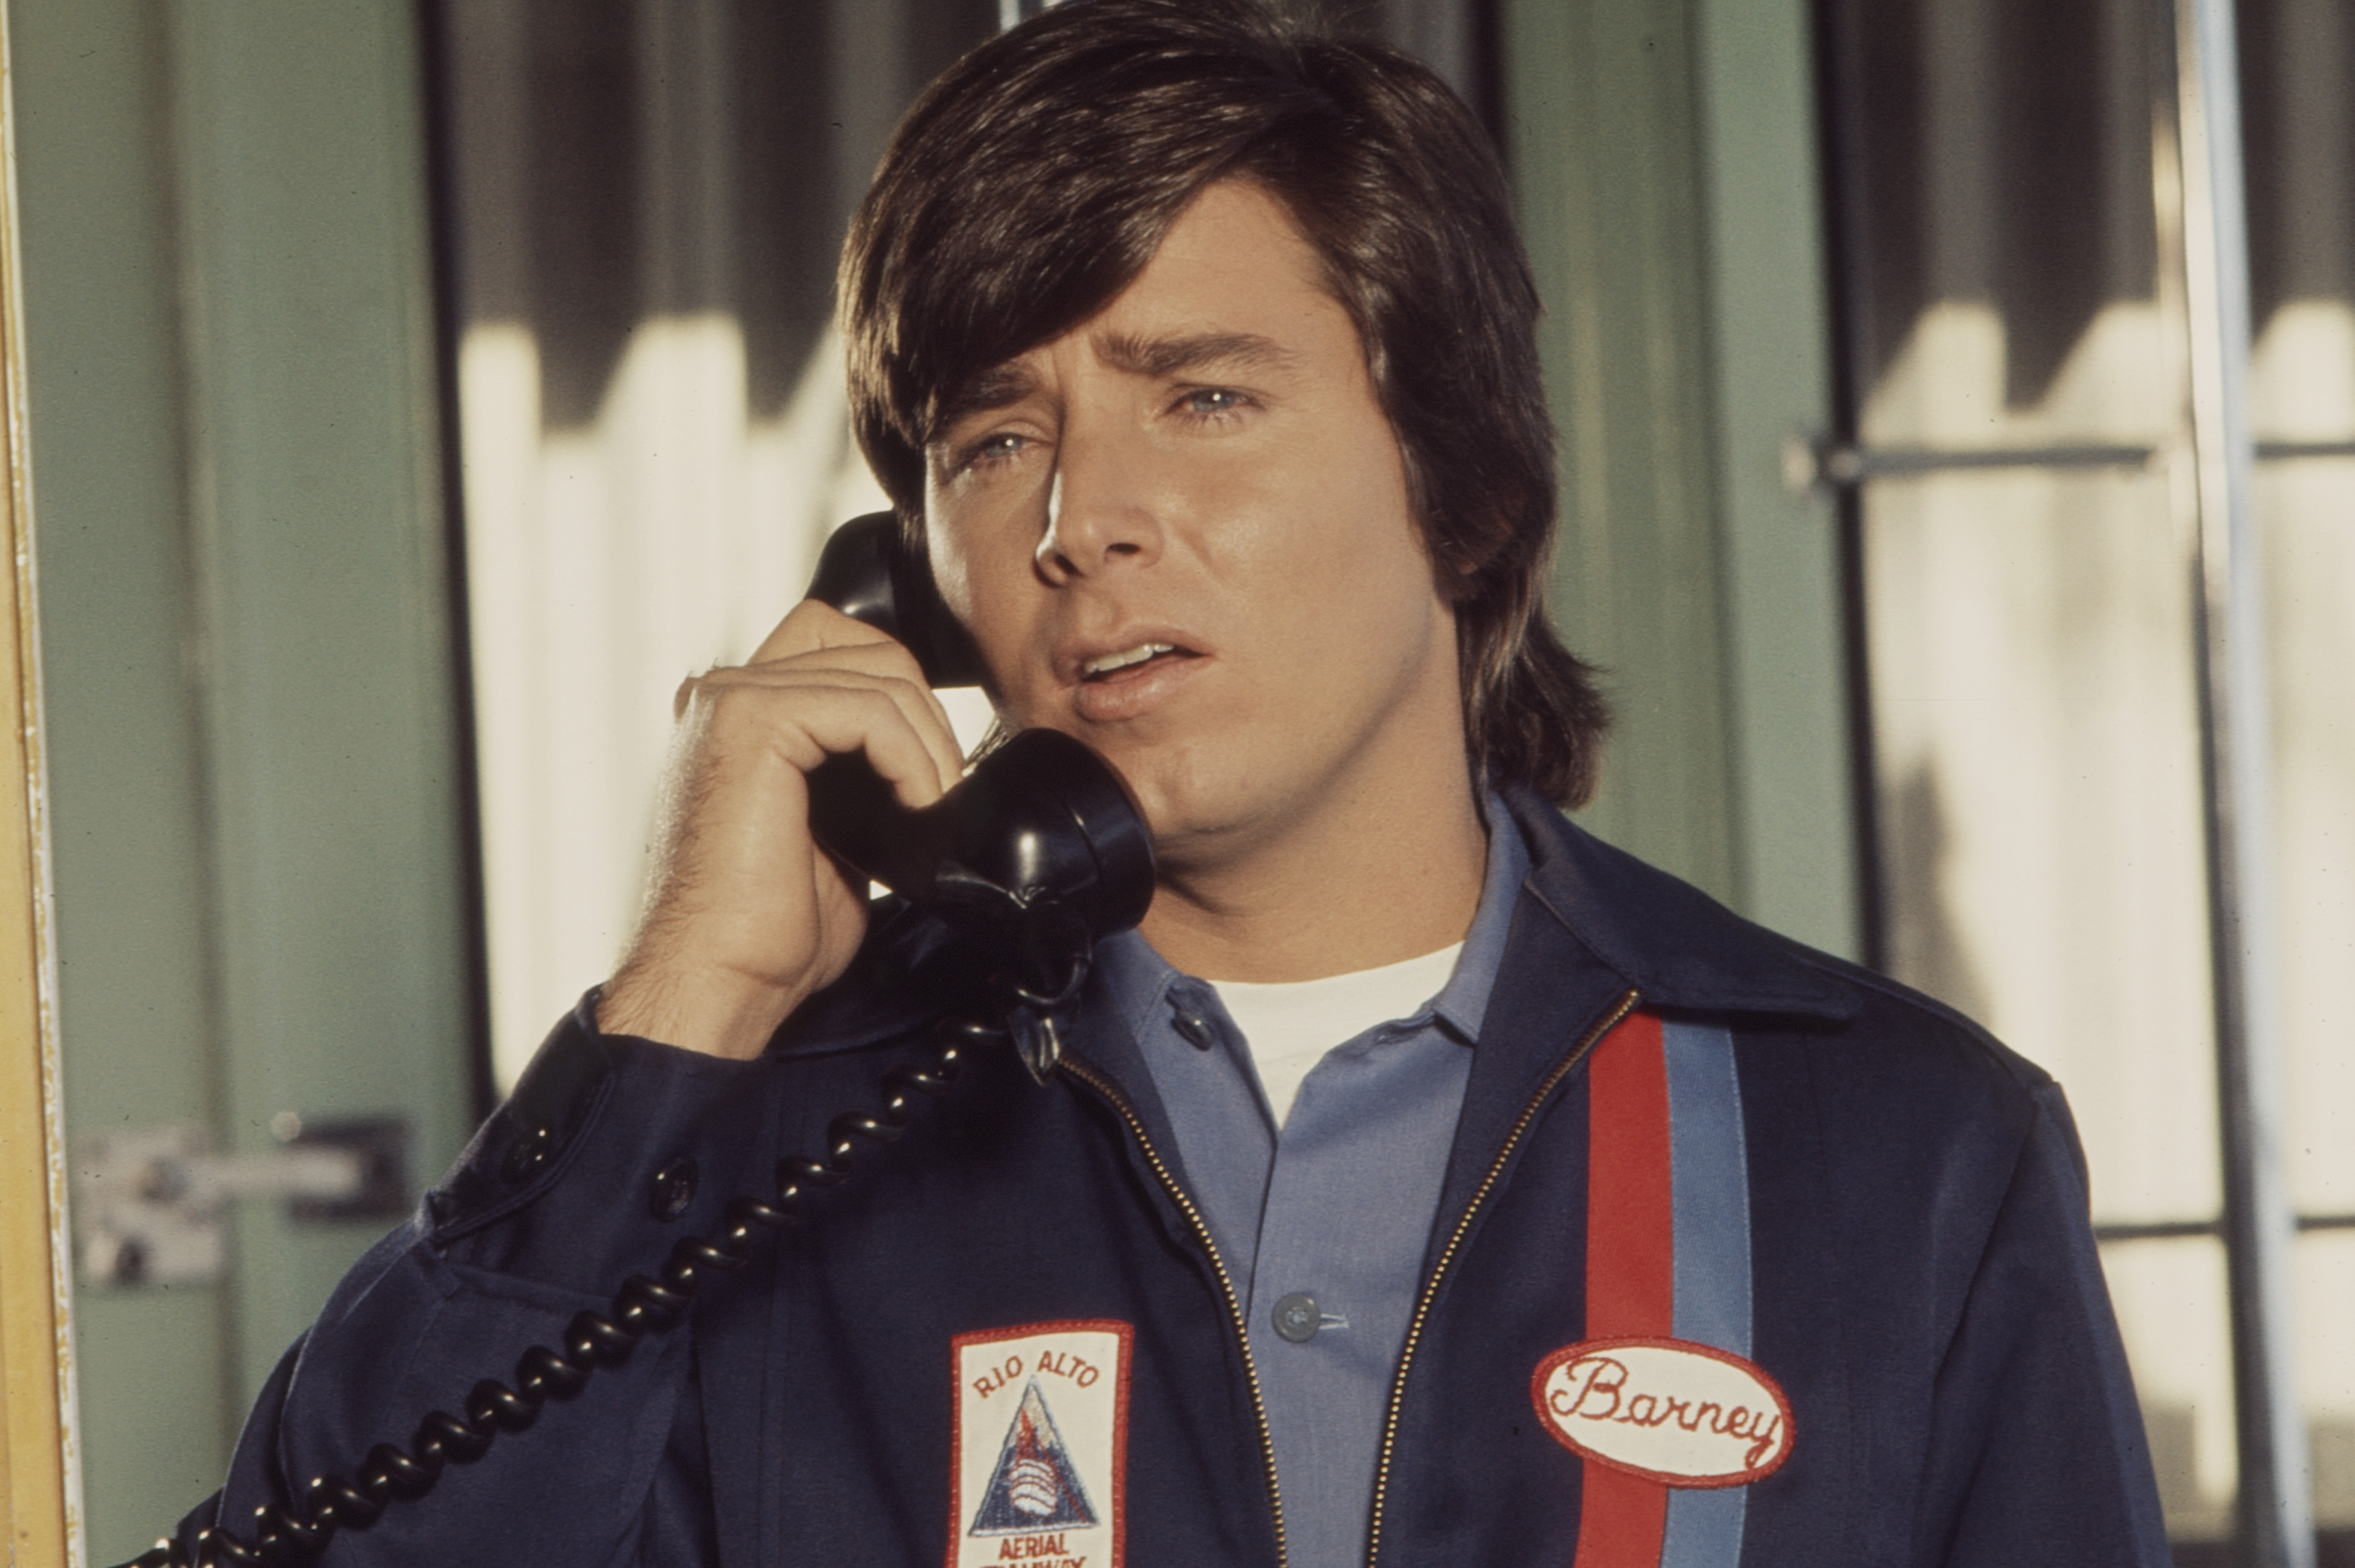 Bobby Sherman in the movie "Skyway to Death" in Palm Springs, California, on January 19, 1974 | Source: Getty Images